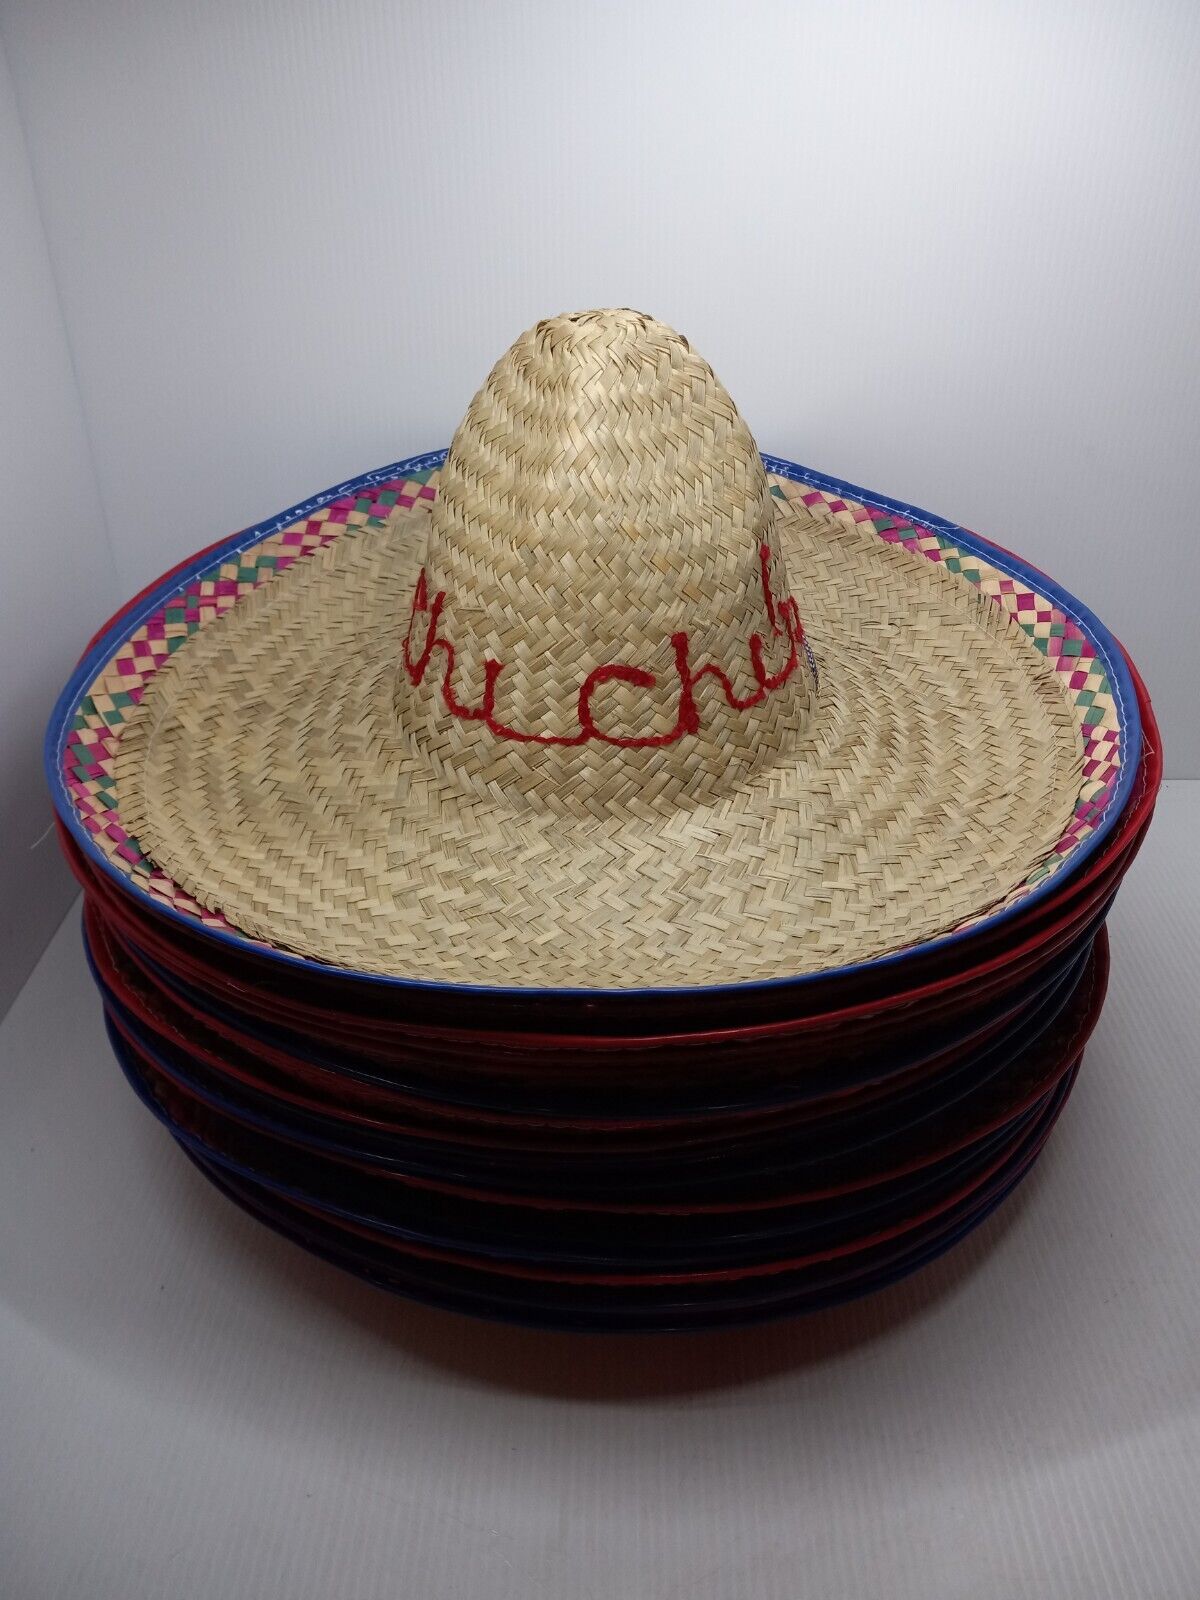 20 Vintage Chi Chi's Restaurant Authentic Straw Sombrero Hat Lot Of 20